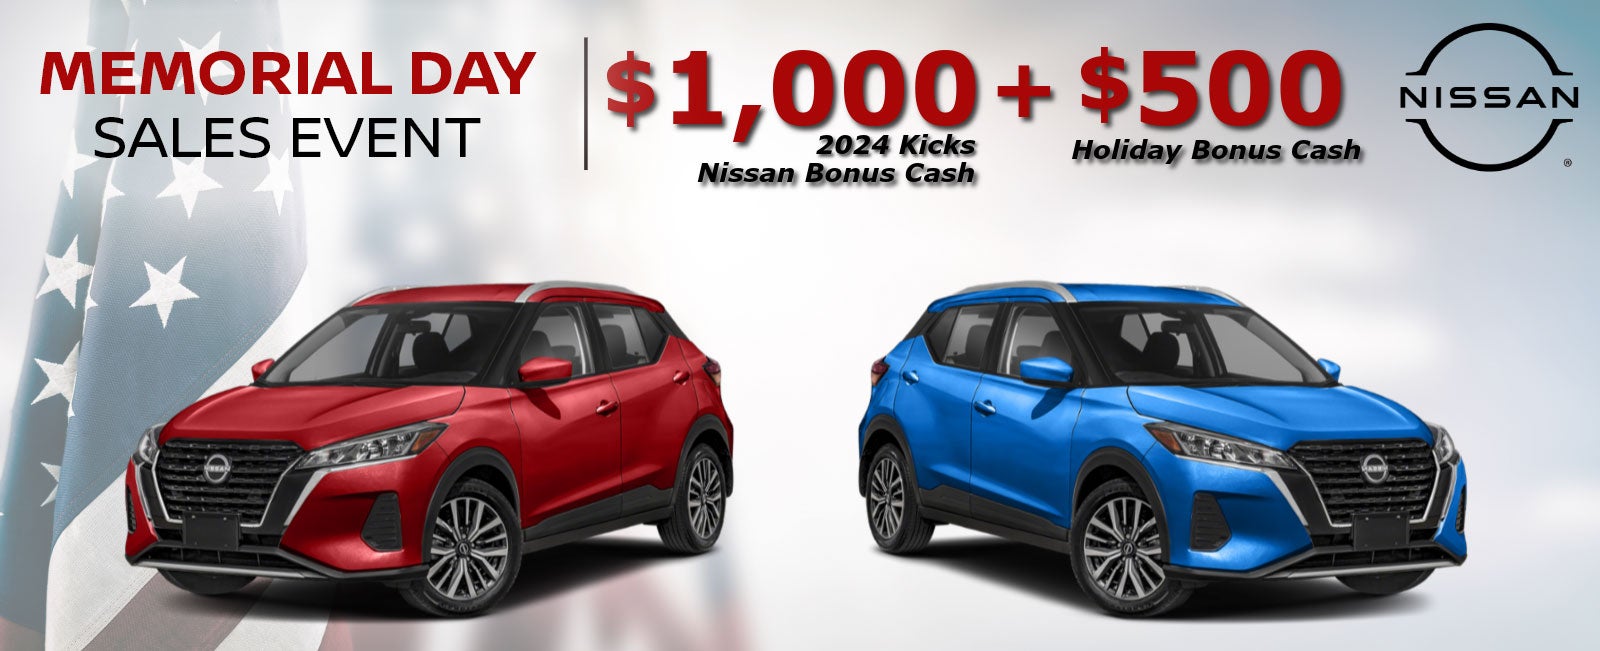 Nissan Memorial Day Sales Event